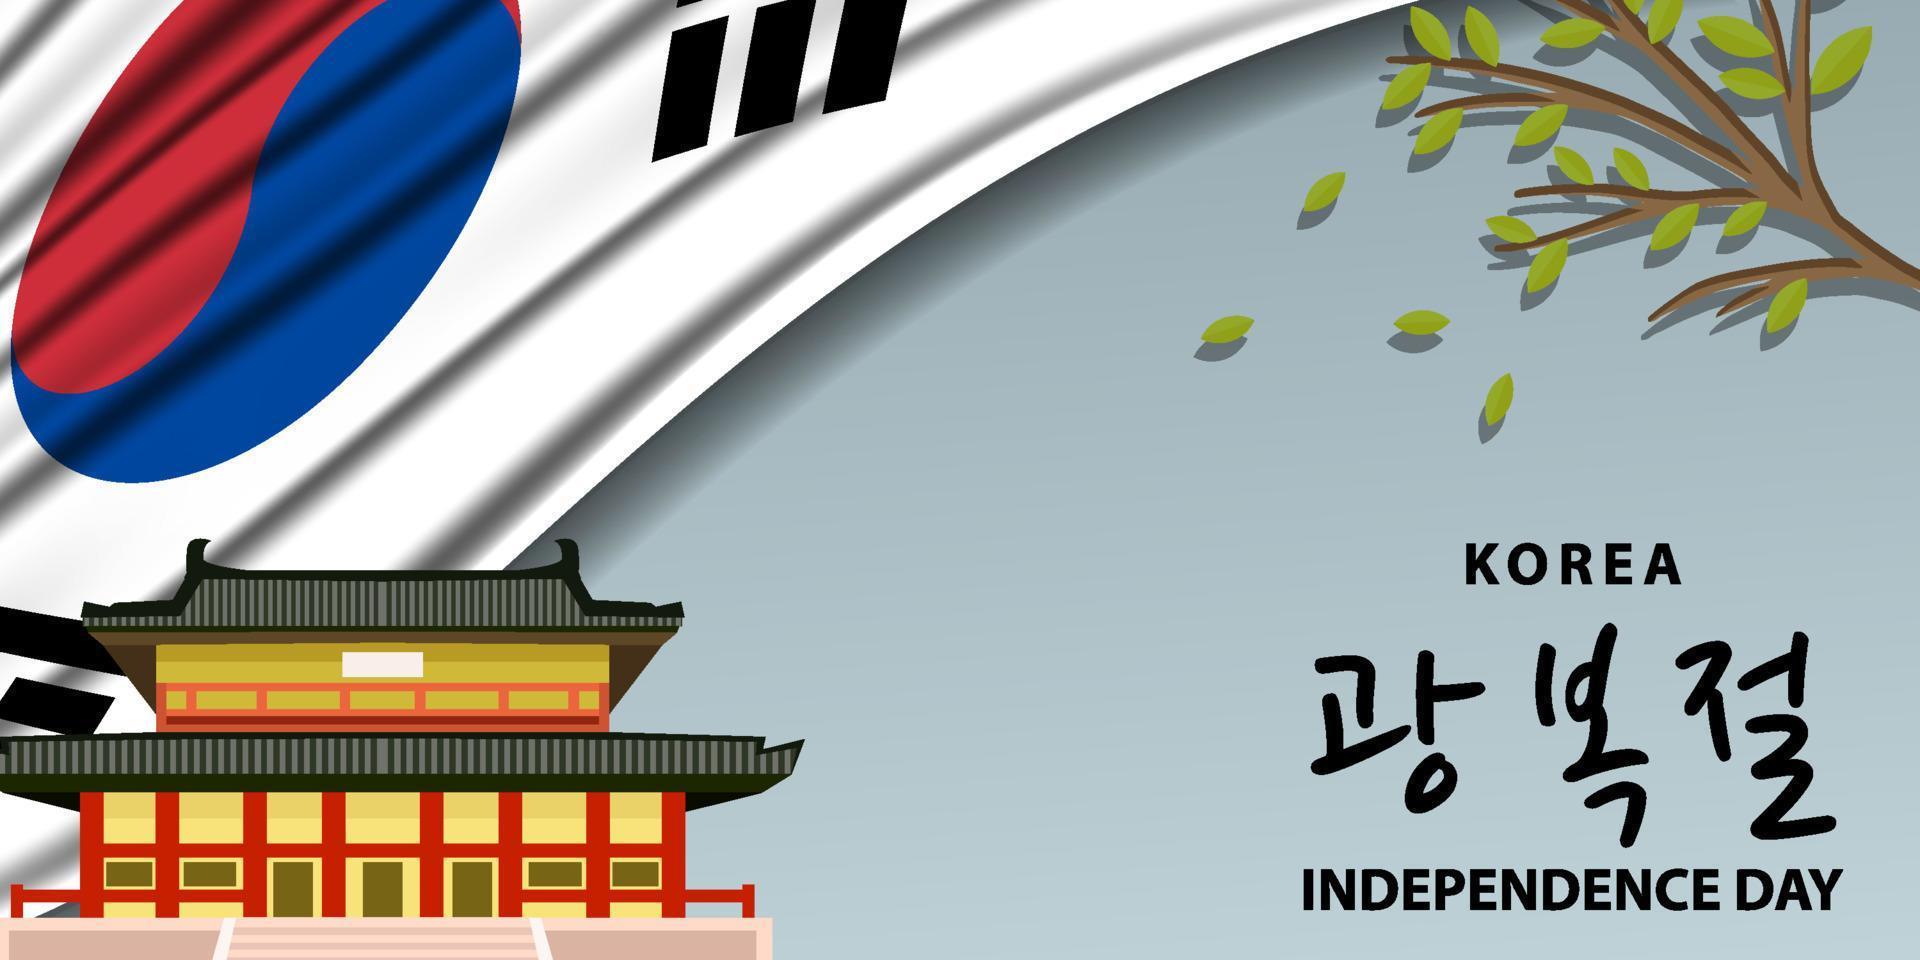 korea independence day background illustration with realistic korean flag, korea palace, and tree vector